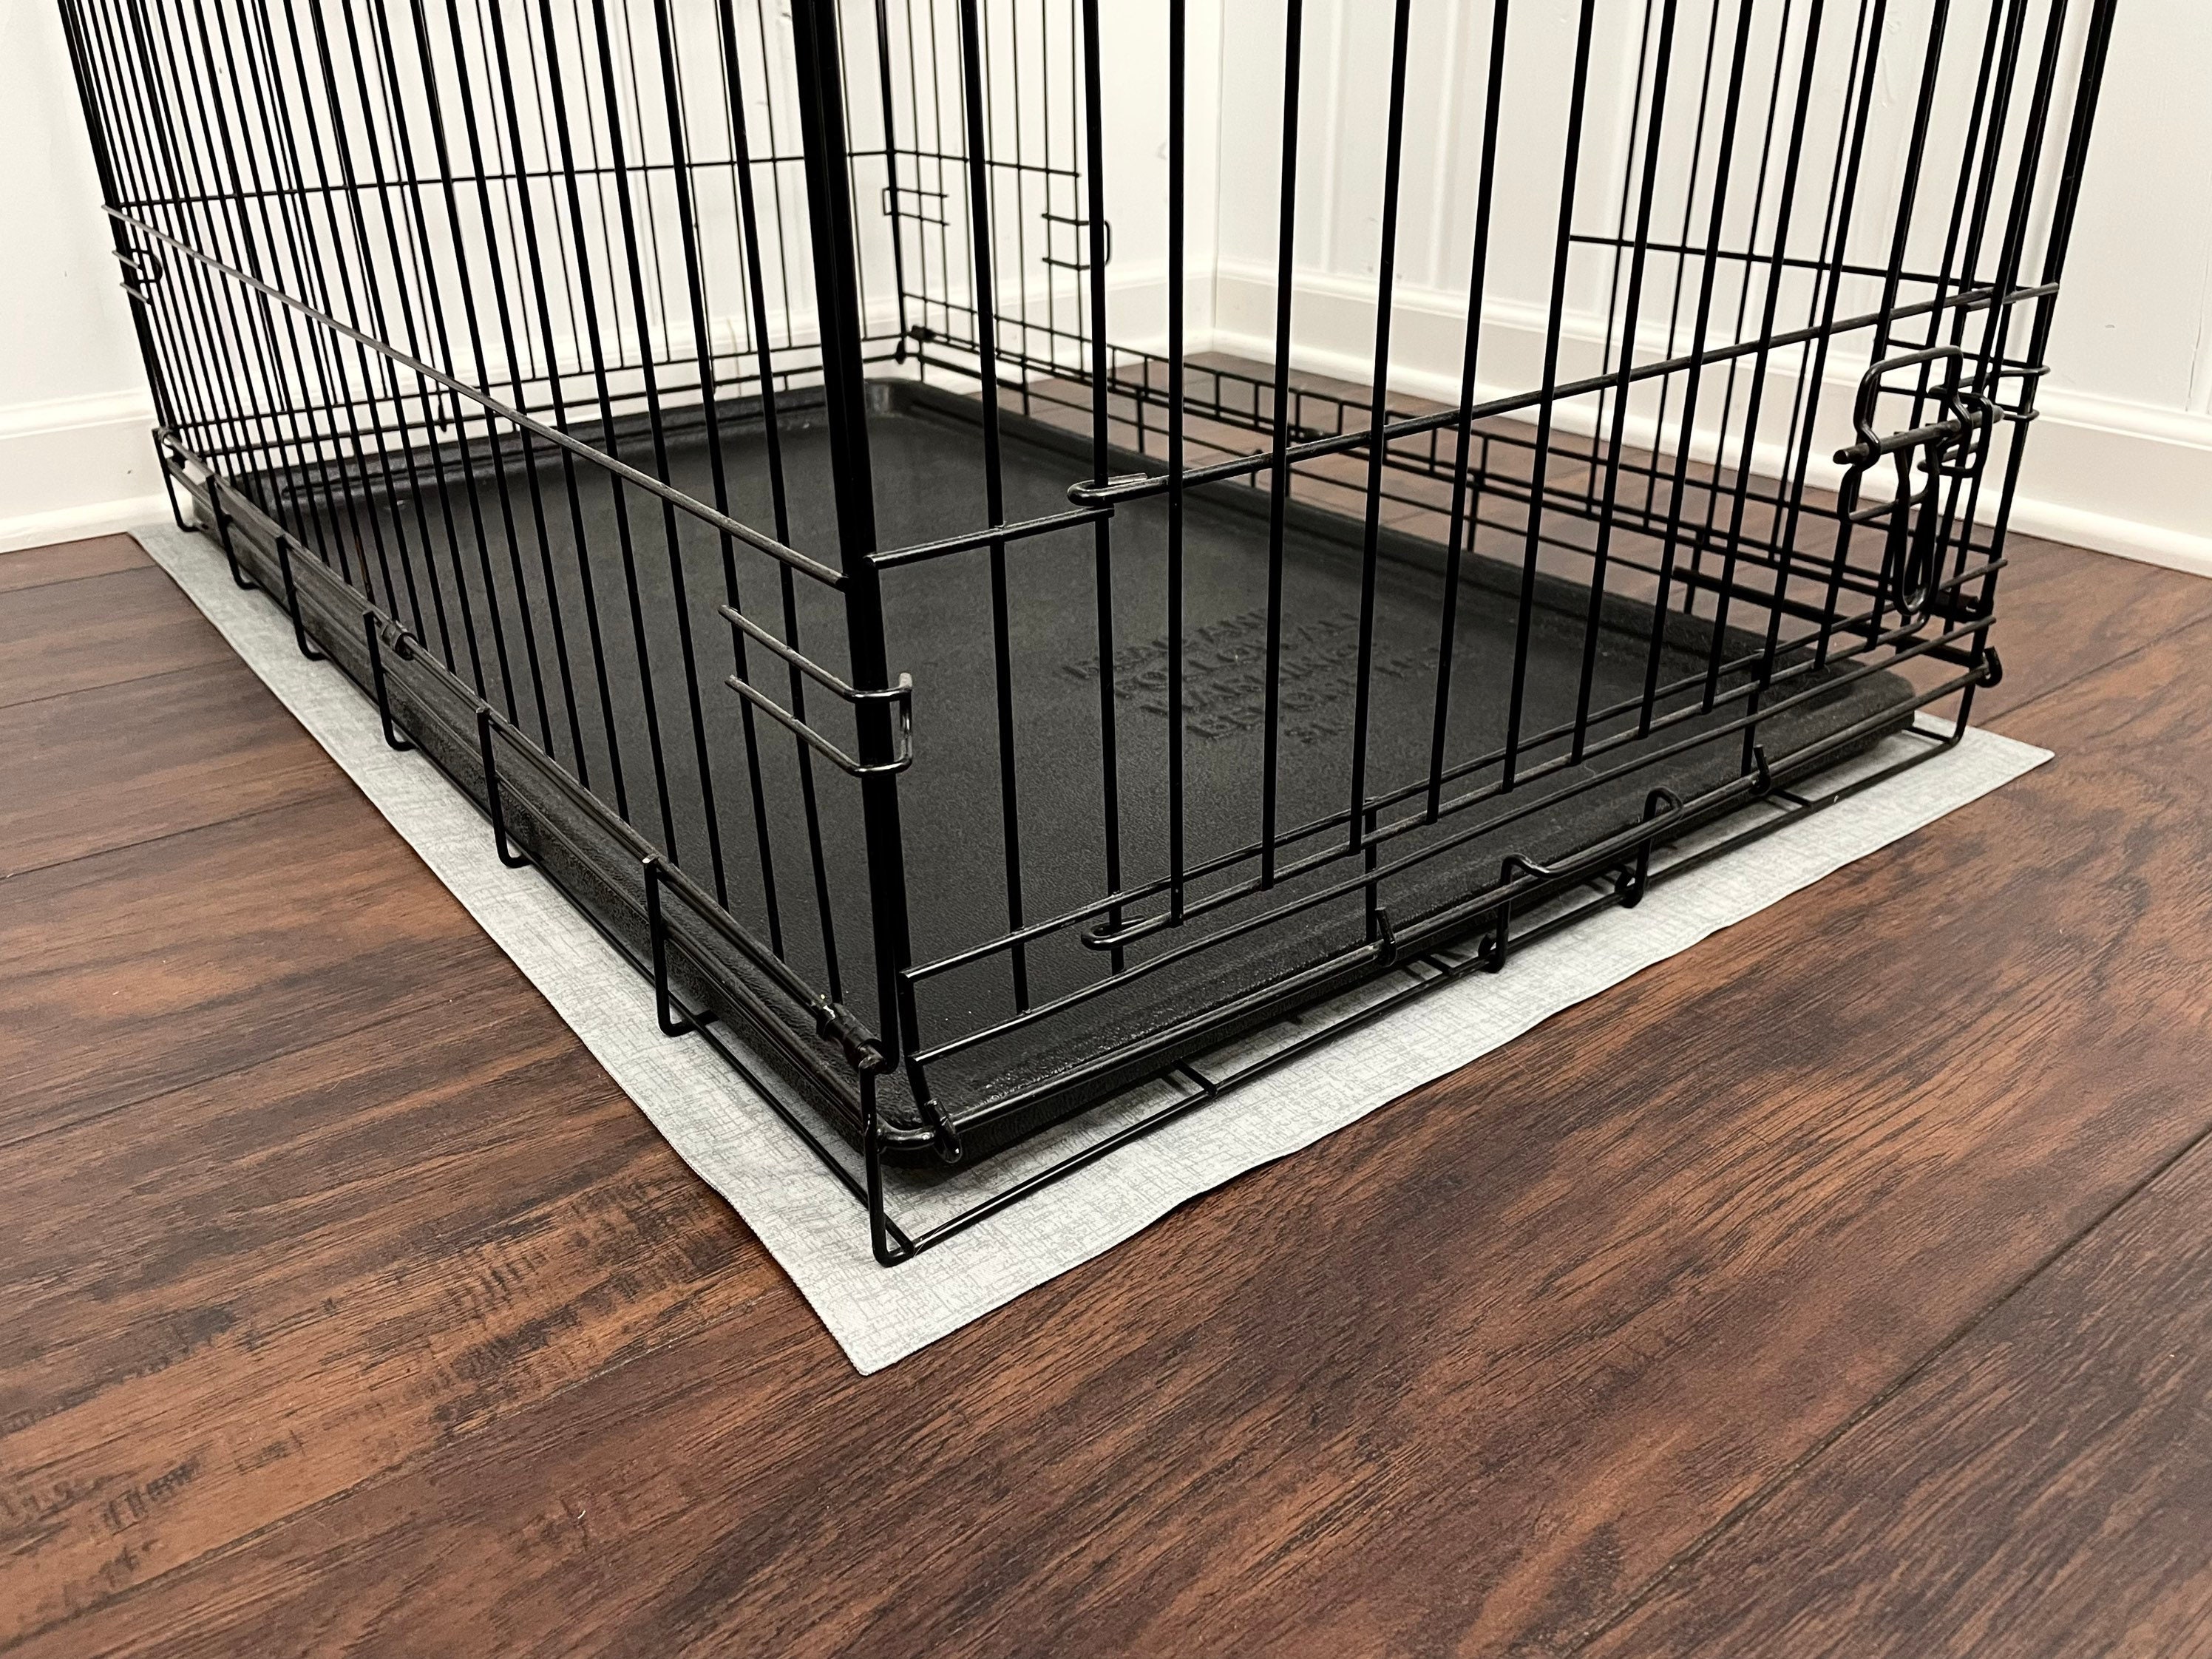 What to Put under Dog Crate to Protect Hardwood Floors?